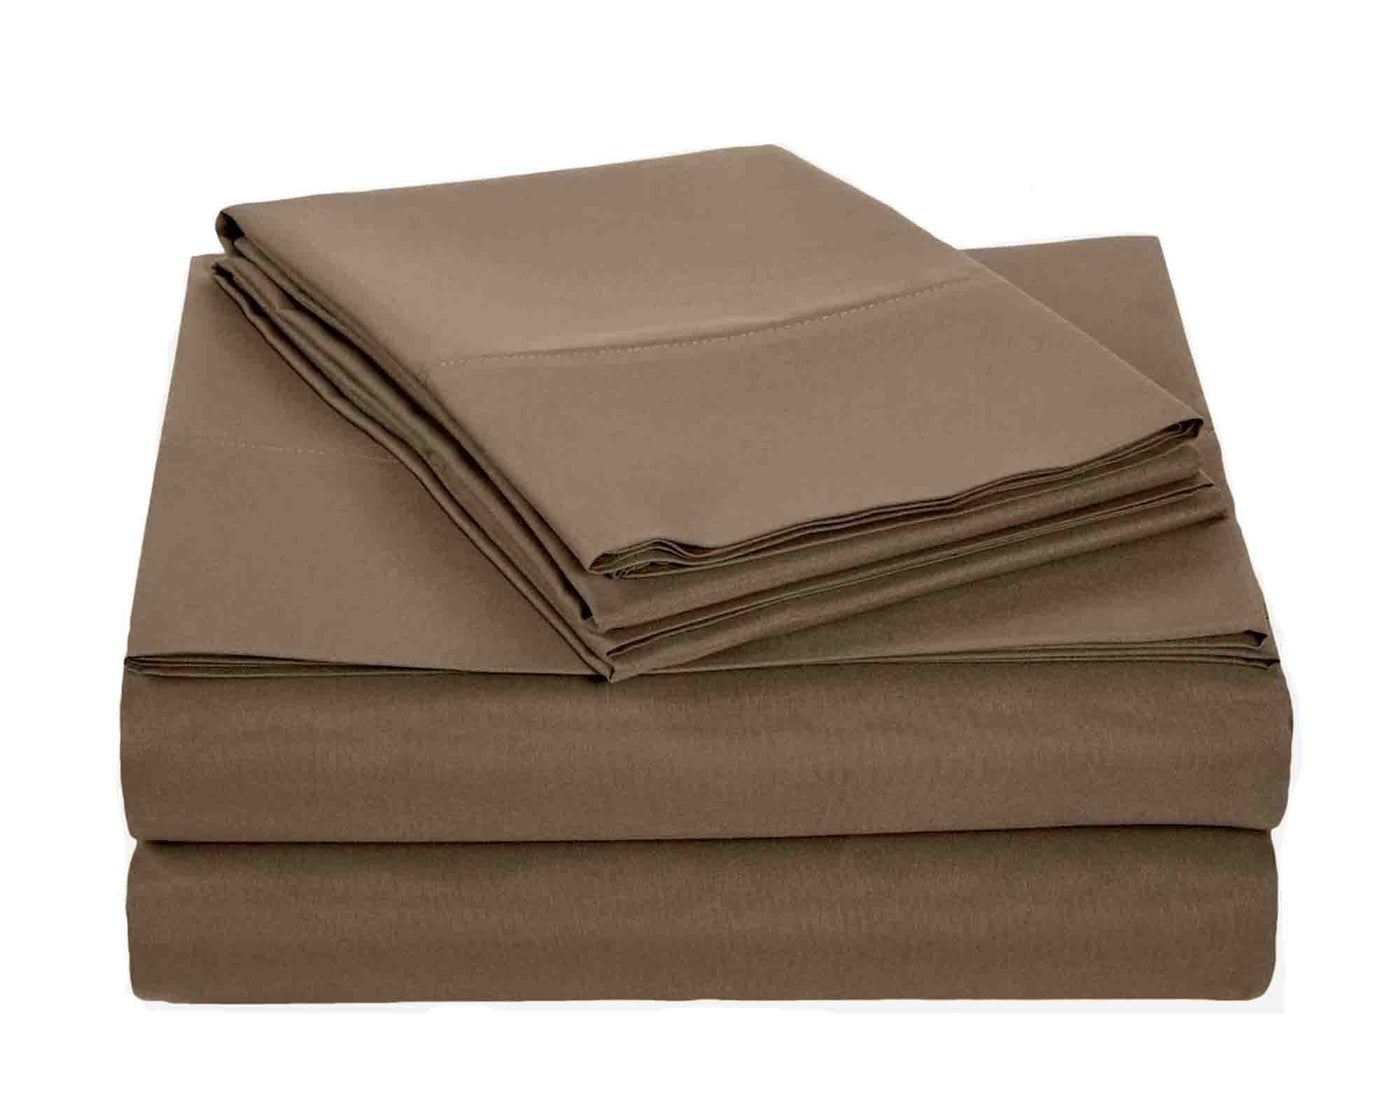 espresso sheet set included 2 pillowcases 1 fitted sheet and 1 flat sheet